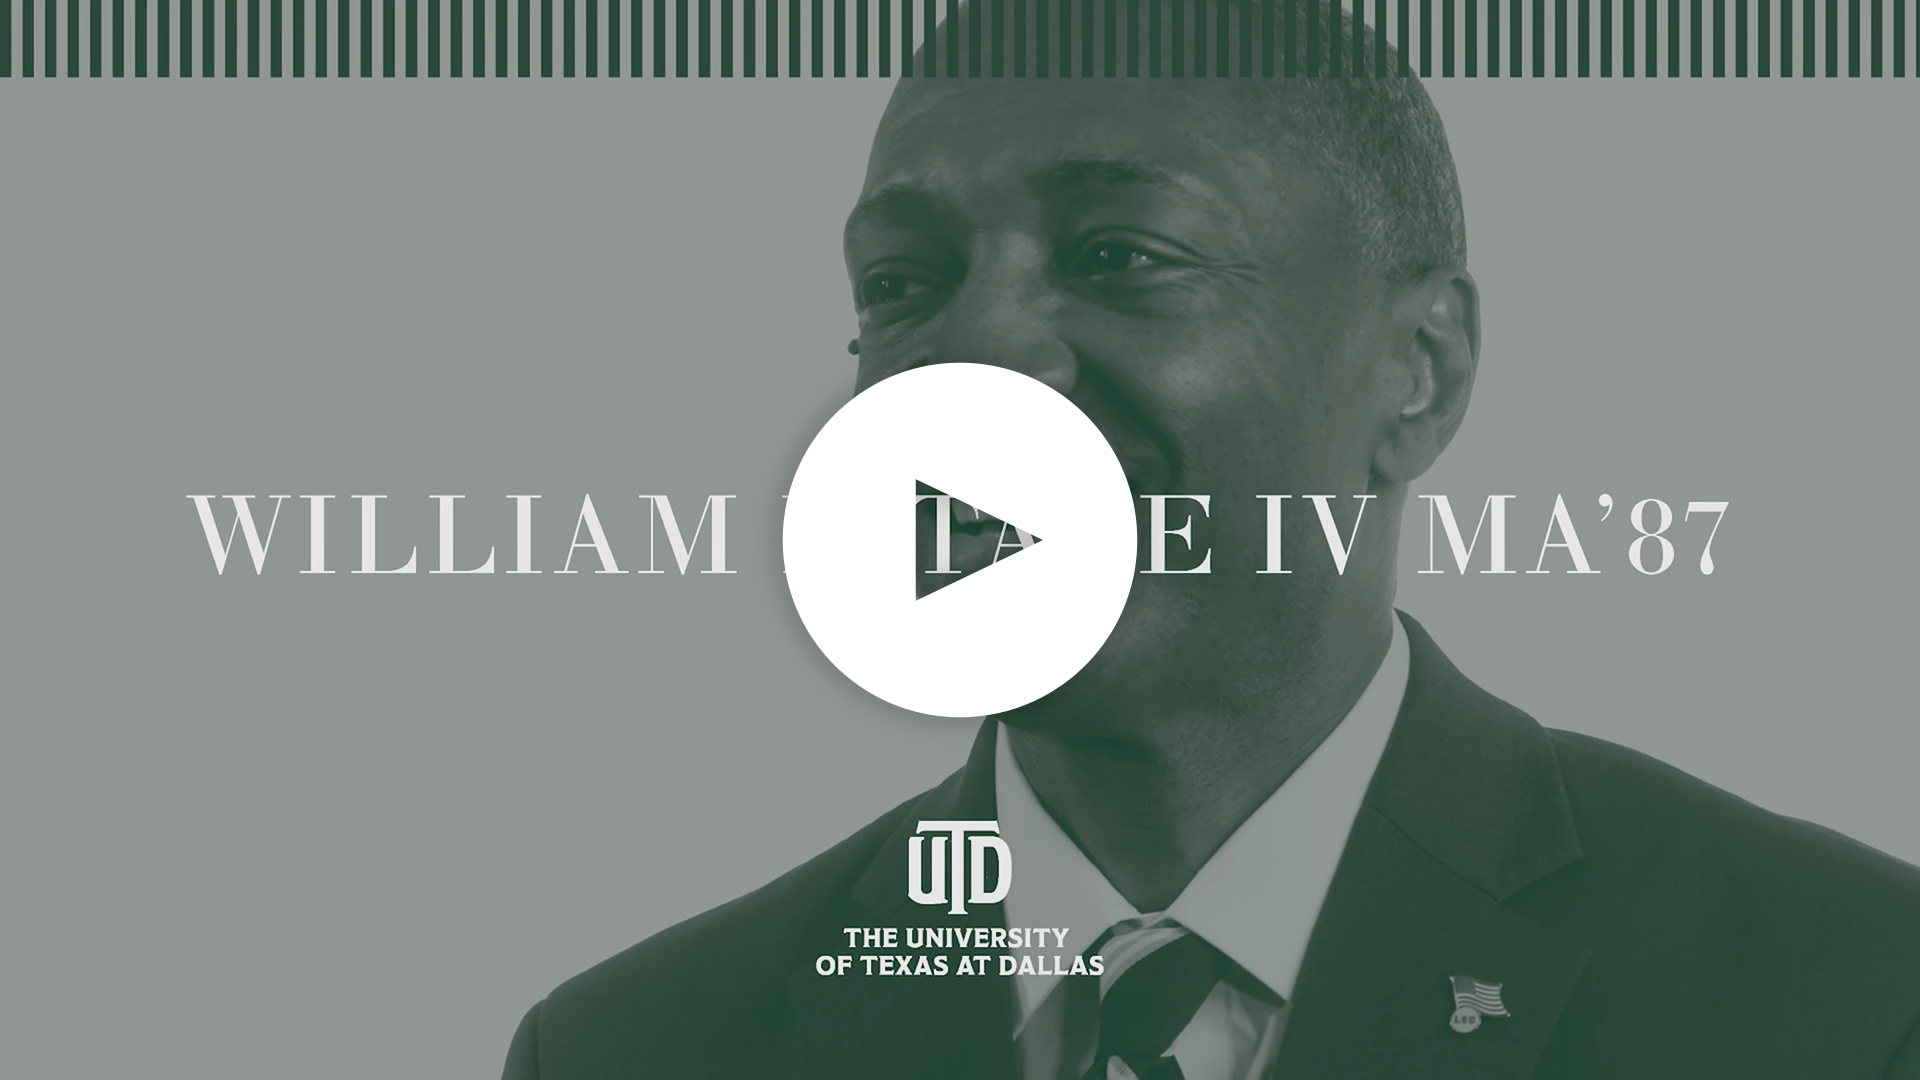 Watch William F. Tate IV's interview on YouTube